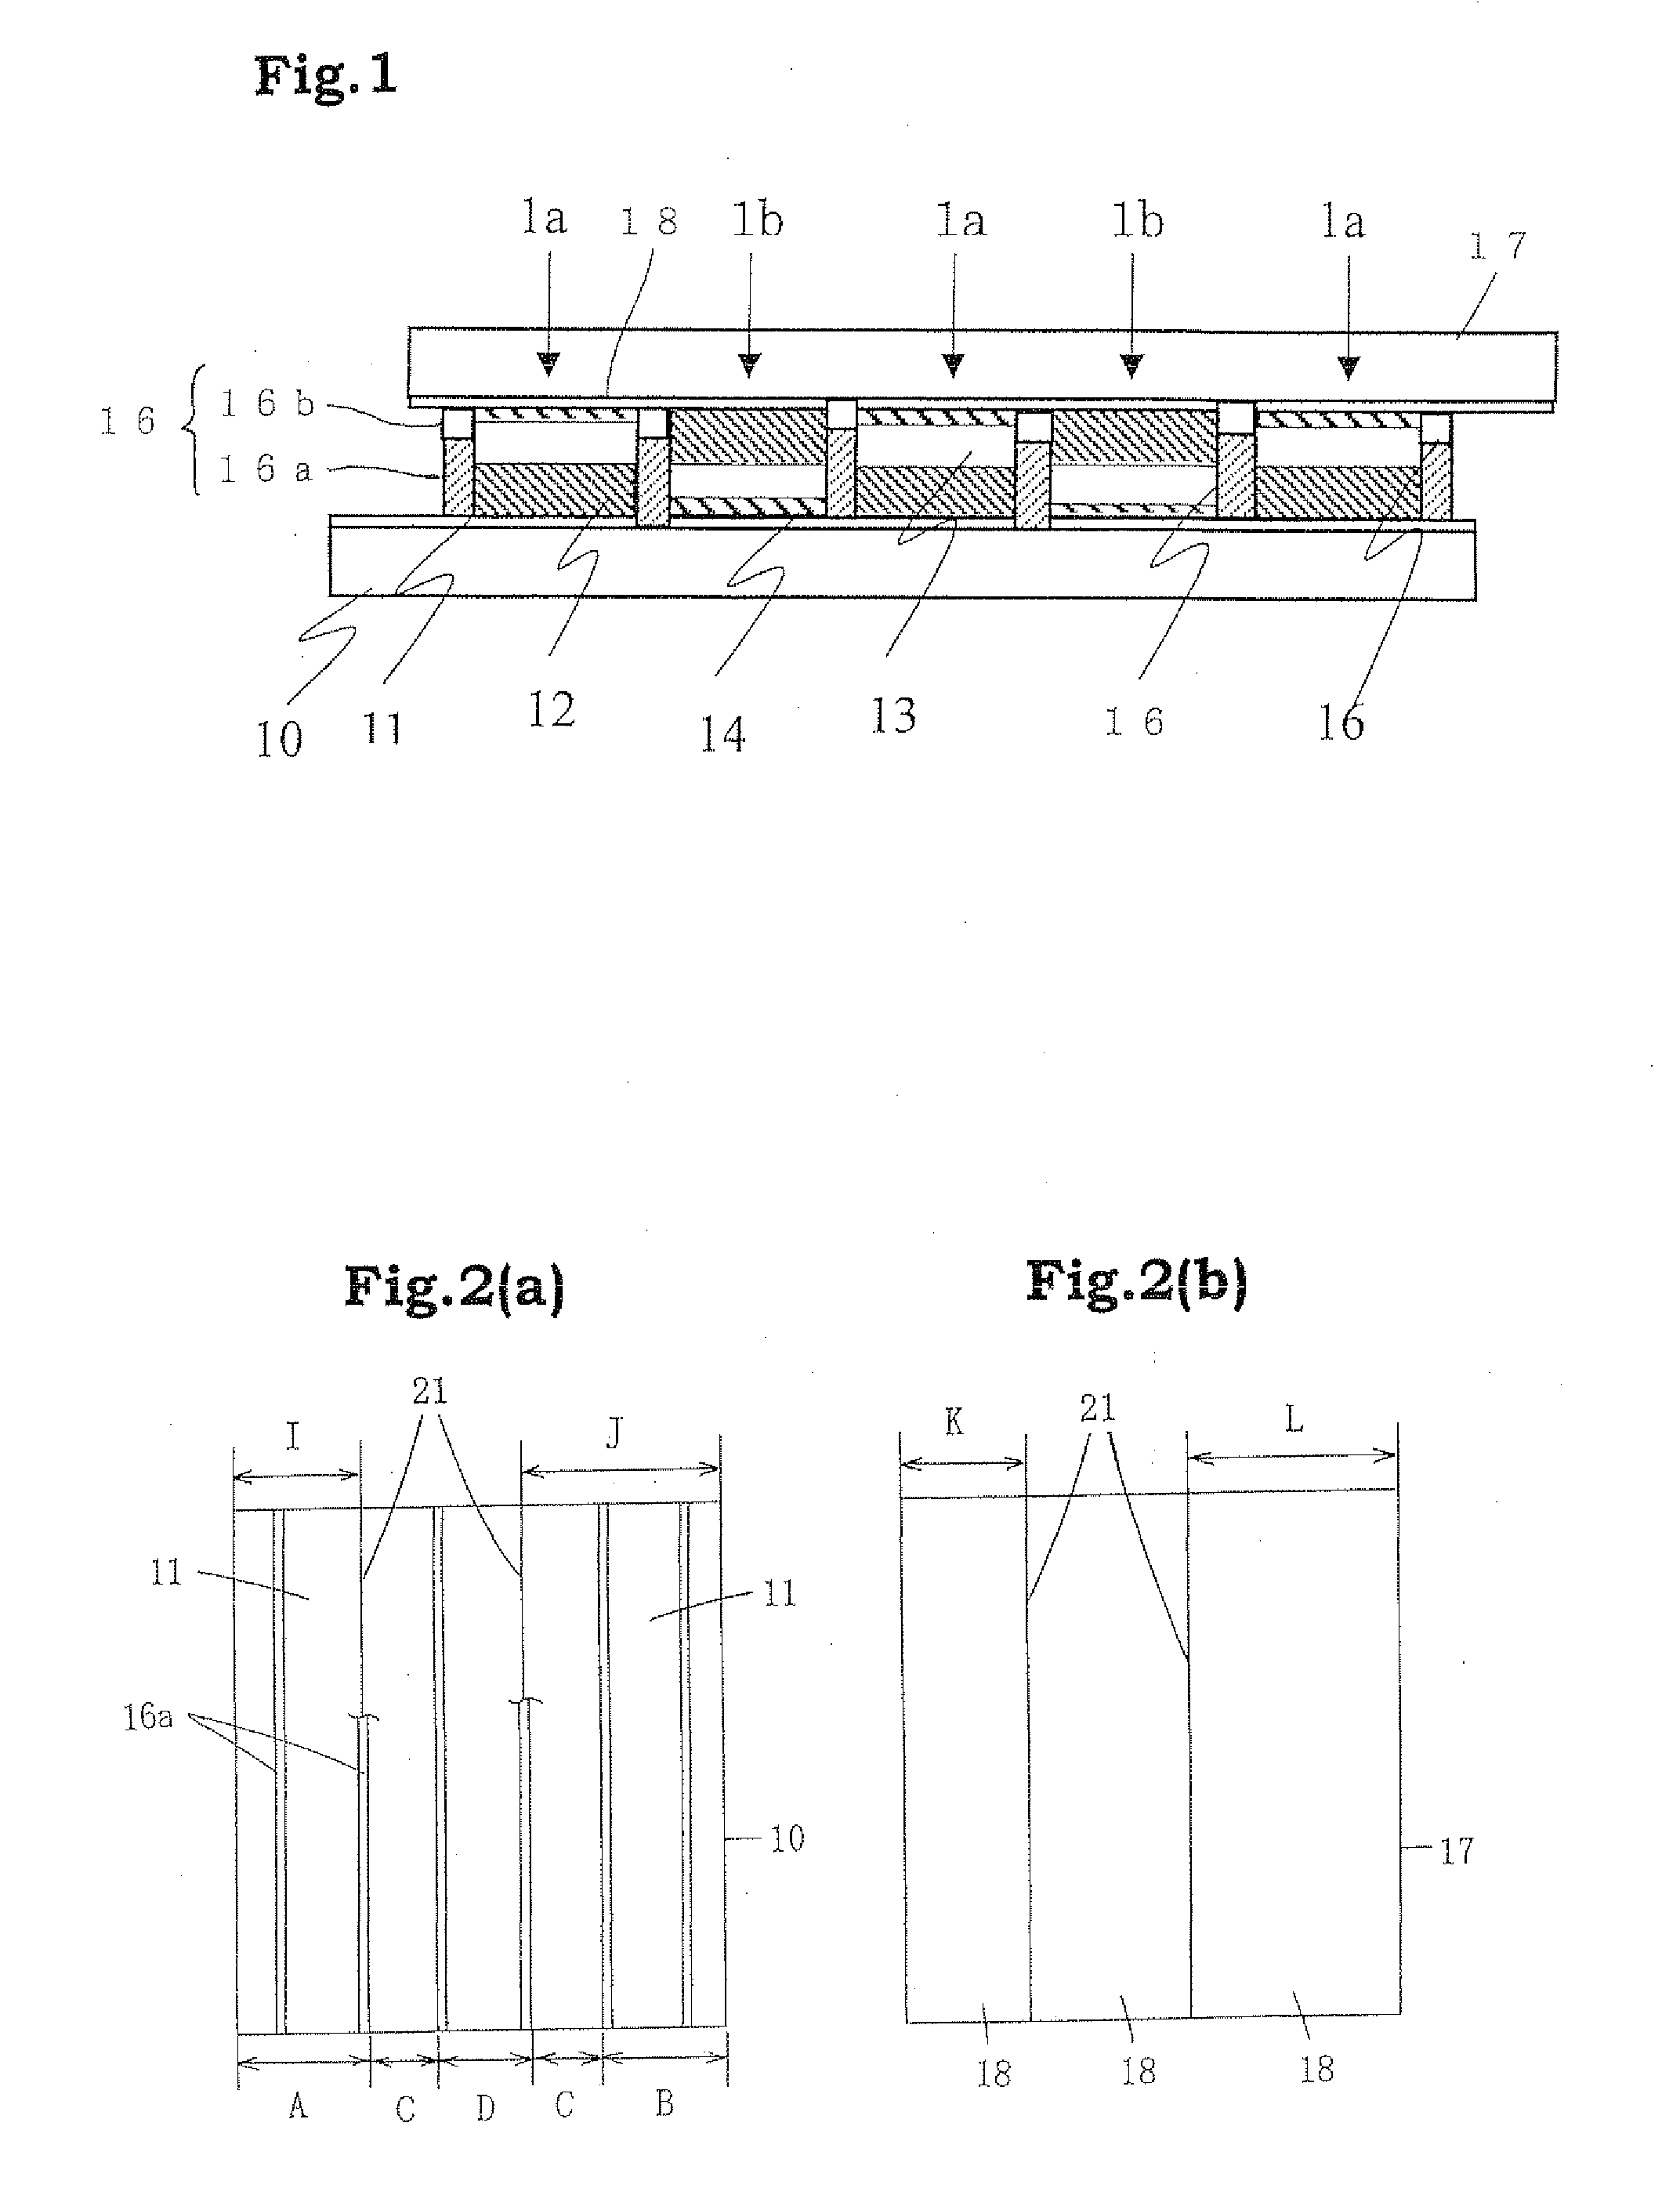 Dye-sensitized solar cell module and method of manufacturing the same (as amended)